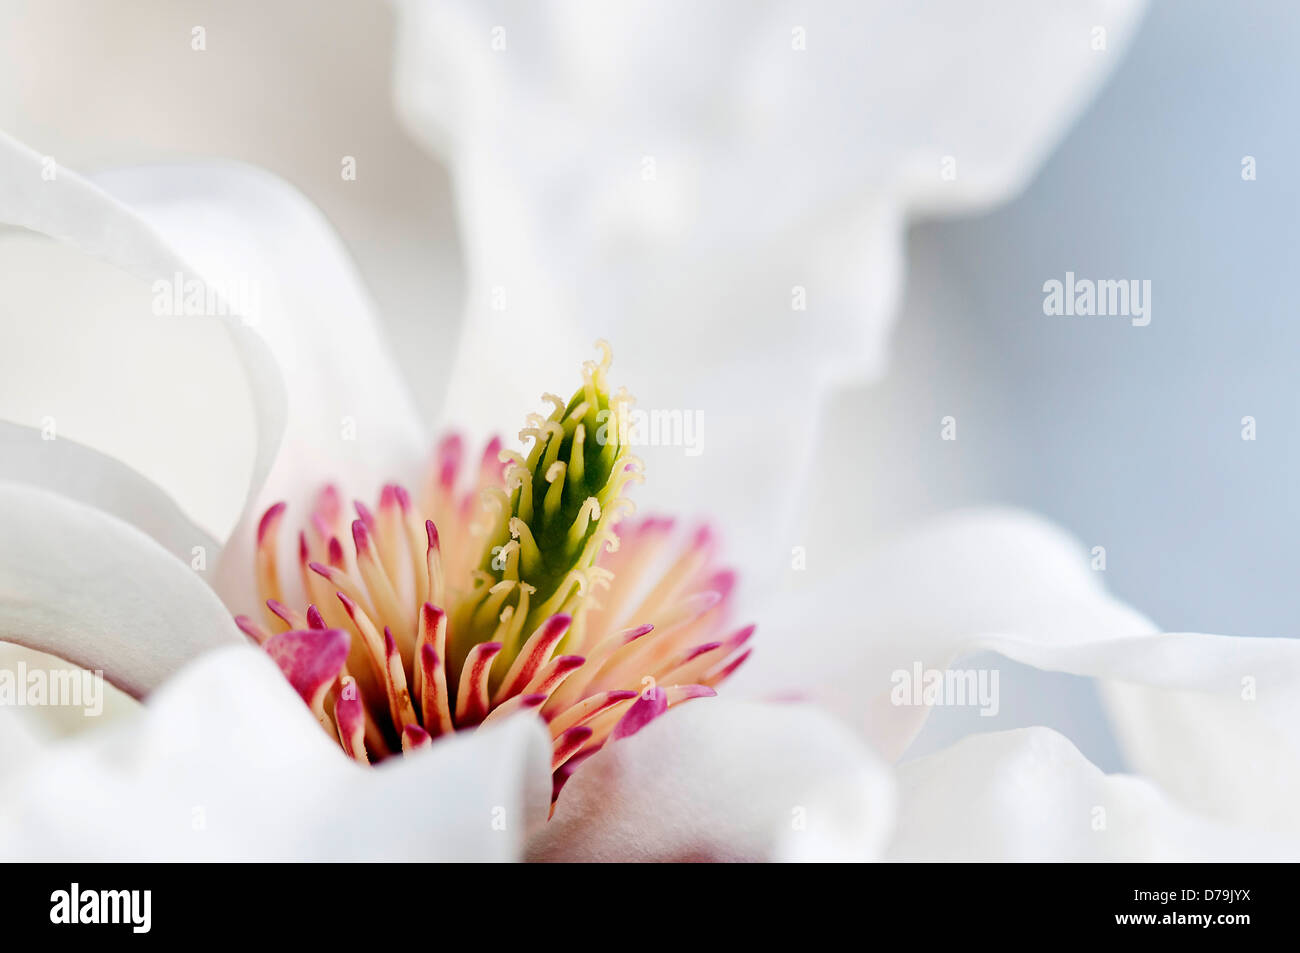 Magnolia salicifolia var. concolor, Close-up of pure white flower with green stamen surrounded by pink and cream at centre. Stock Photo